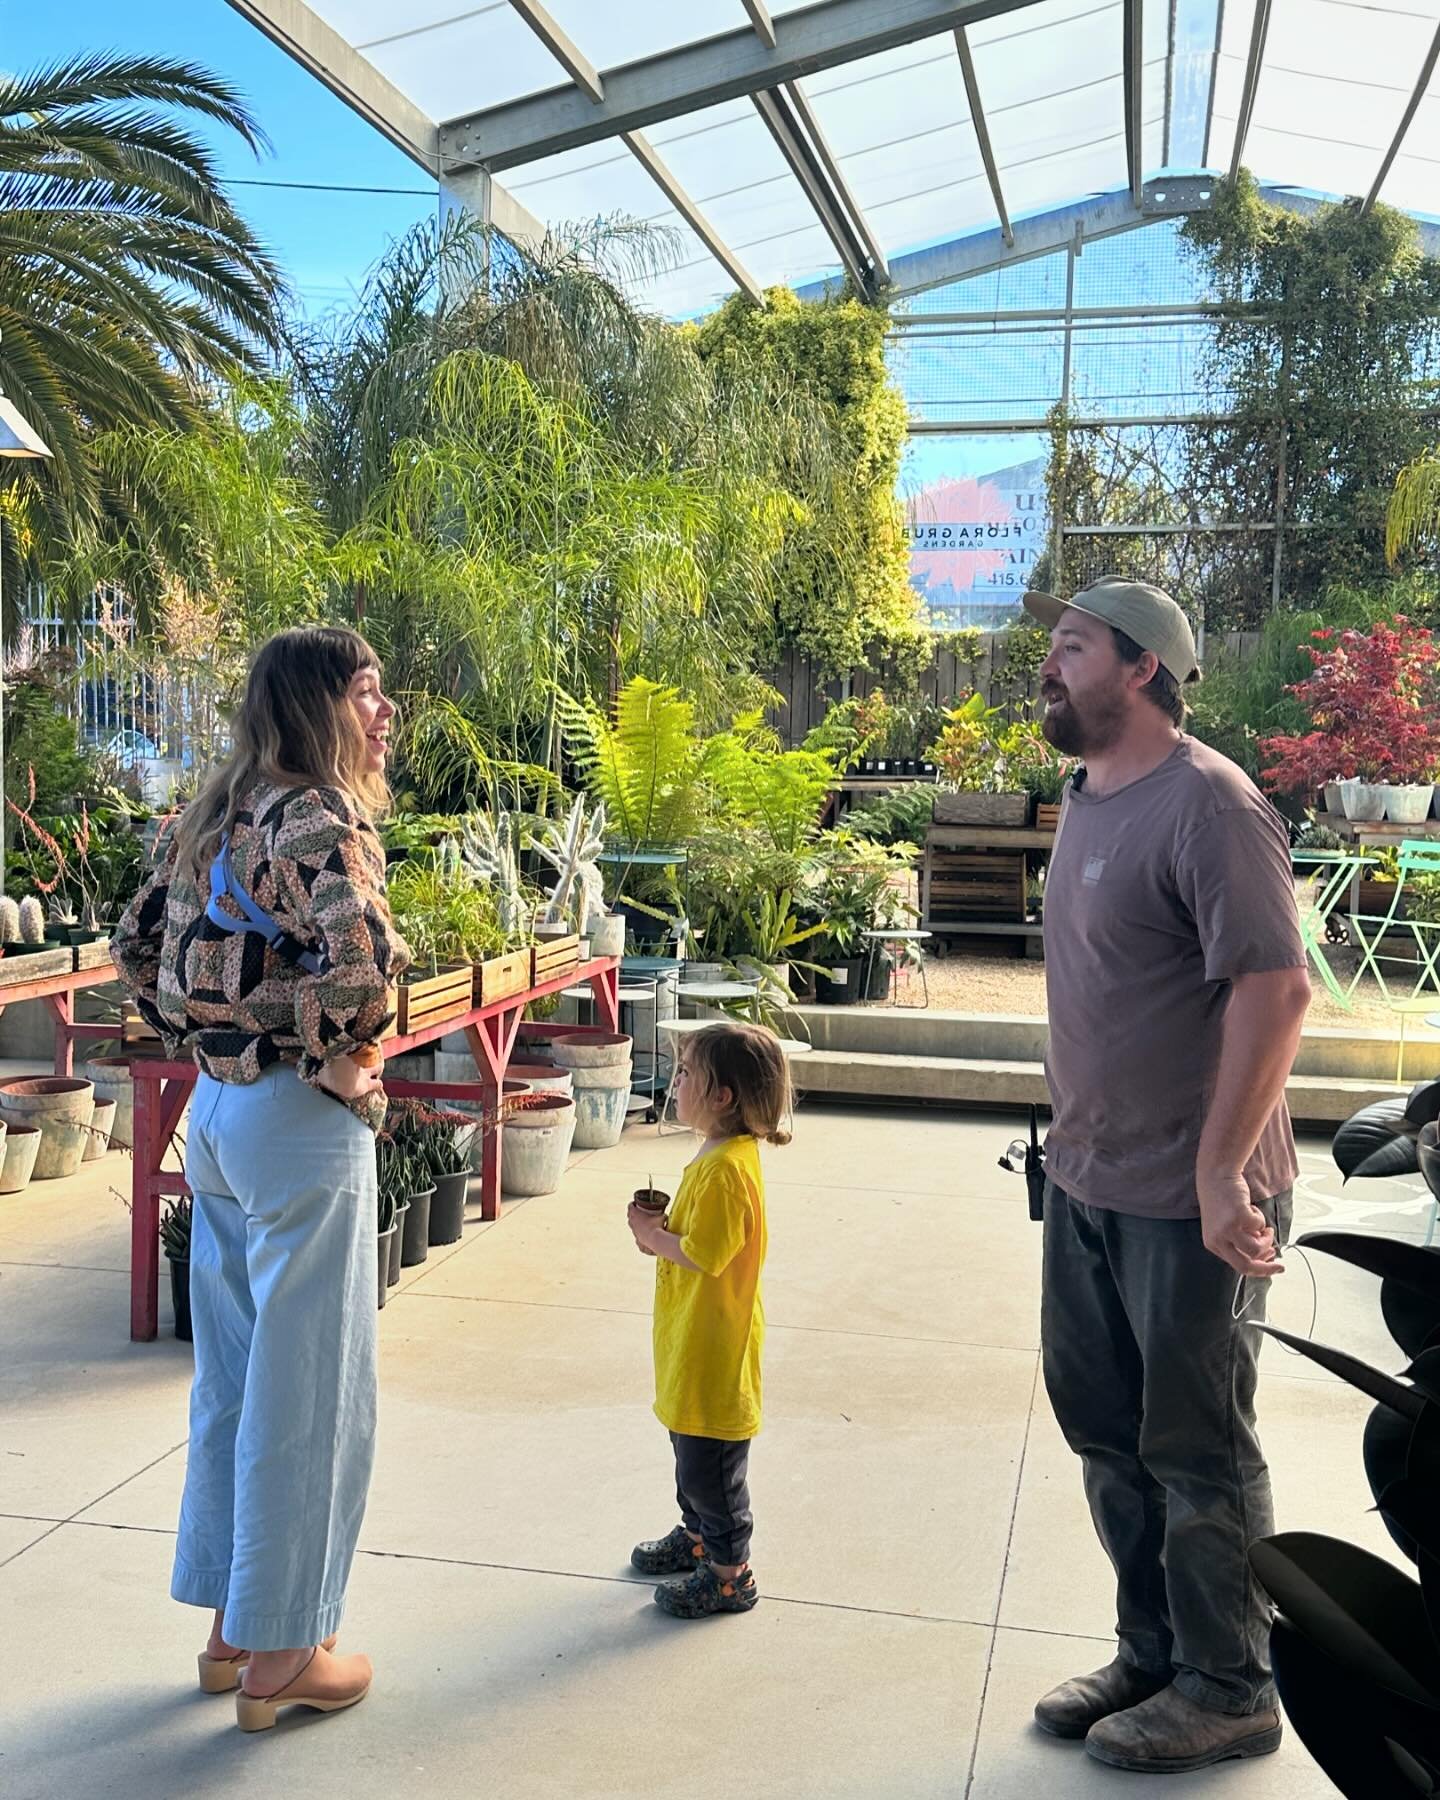 Moms love Flora Grubb! Bring her to see us this weekend in SF or LA. We can&rsquo;t wait to help you and your beloved moms and mother figures find the best gifts and plants.

#floragrubbgardens #plants #garden #gardening #mothersday #sanfrancisco #lo